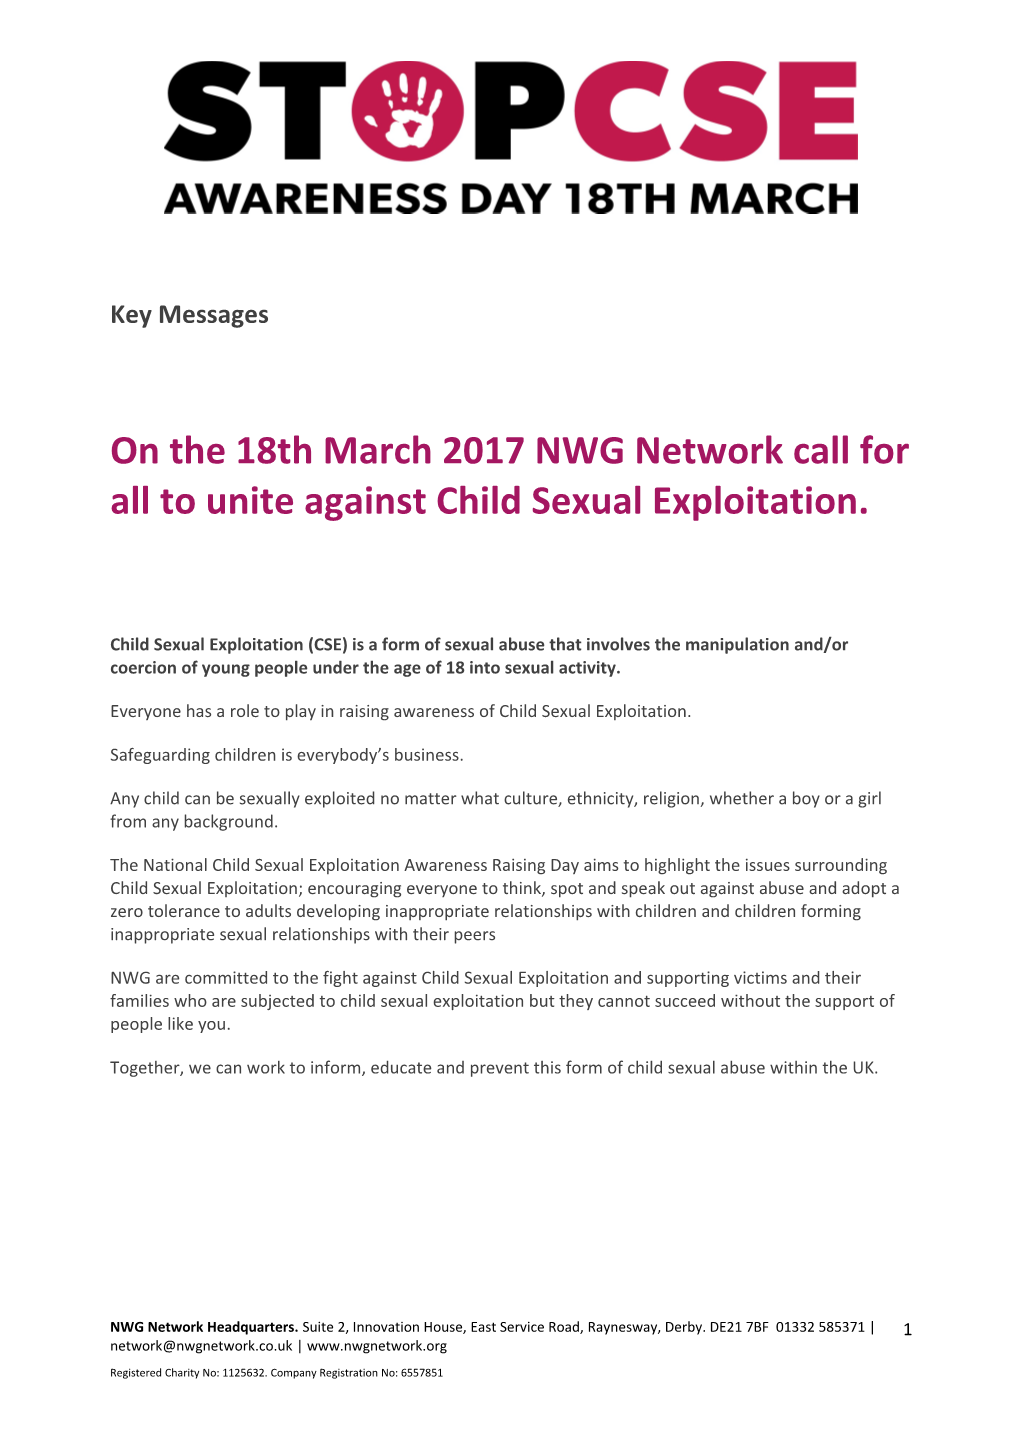 On the 18Th March 2017 NWG Network Call for All to Unite Against Child Sexual Exploitation